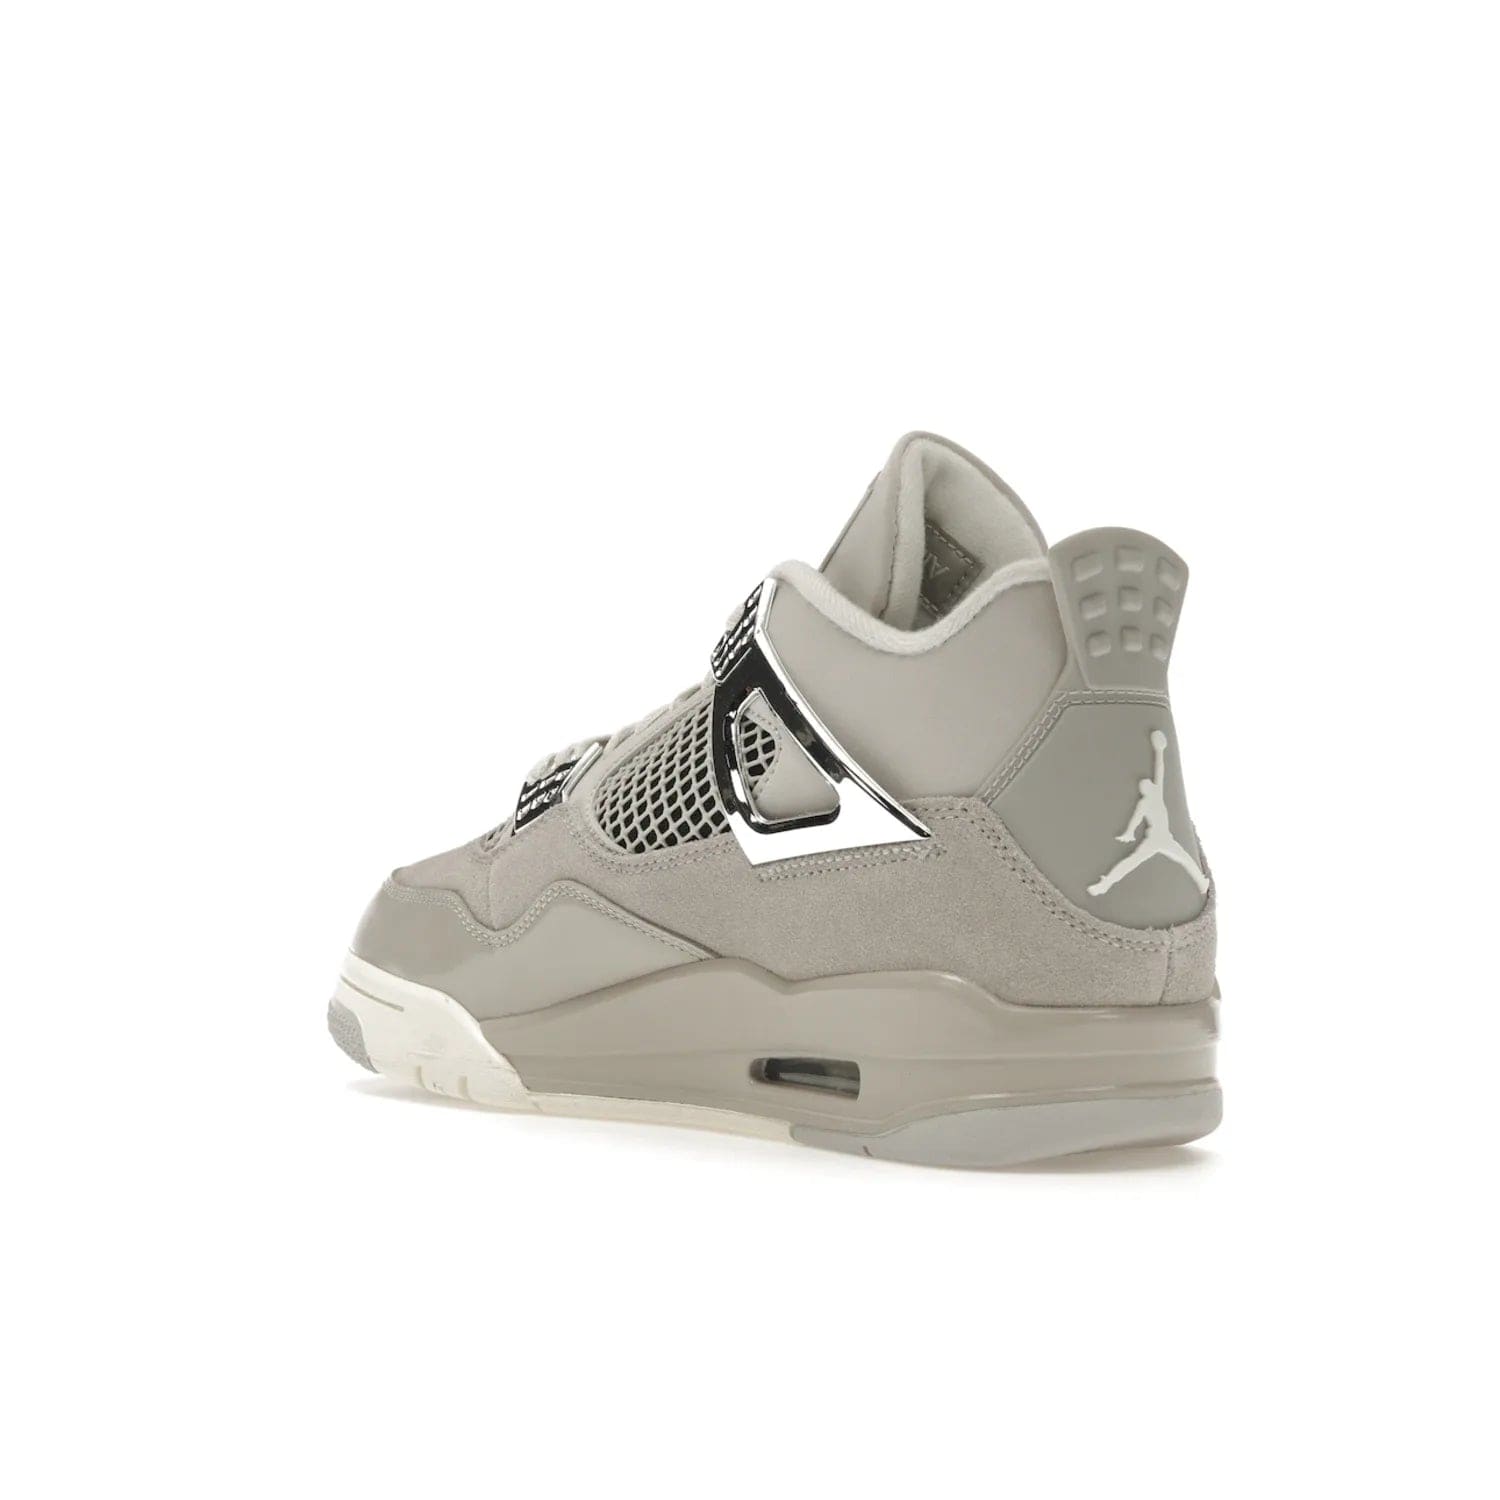 Jordan 4 Retro Frozen Moments (Women's) - Image 24 - Only at www.BallersClubKickz.com - The Jordan 4 Retro Frozen Moments is a stylish blend of classic design elements and modern tones. Featuring suede and leather overlays in a light iron-ore, sail, neutral grey, black, and metallic silver colorway. Get this iconic high-performance sneaker for $210.